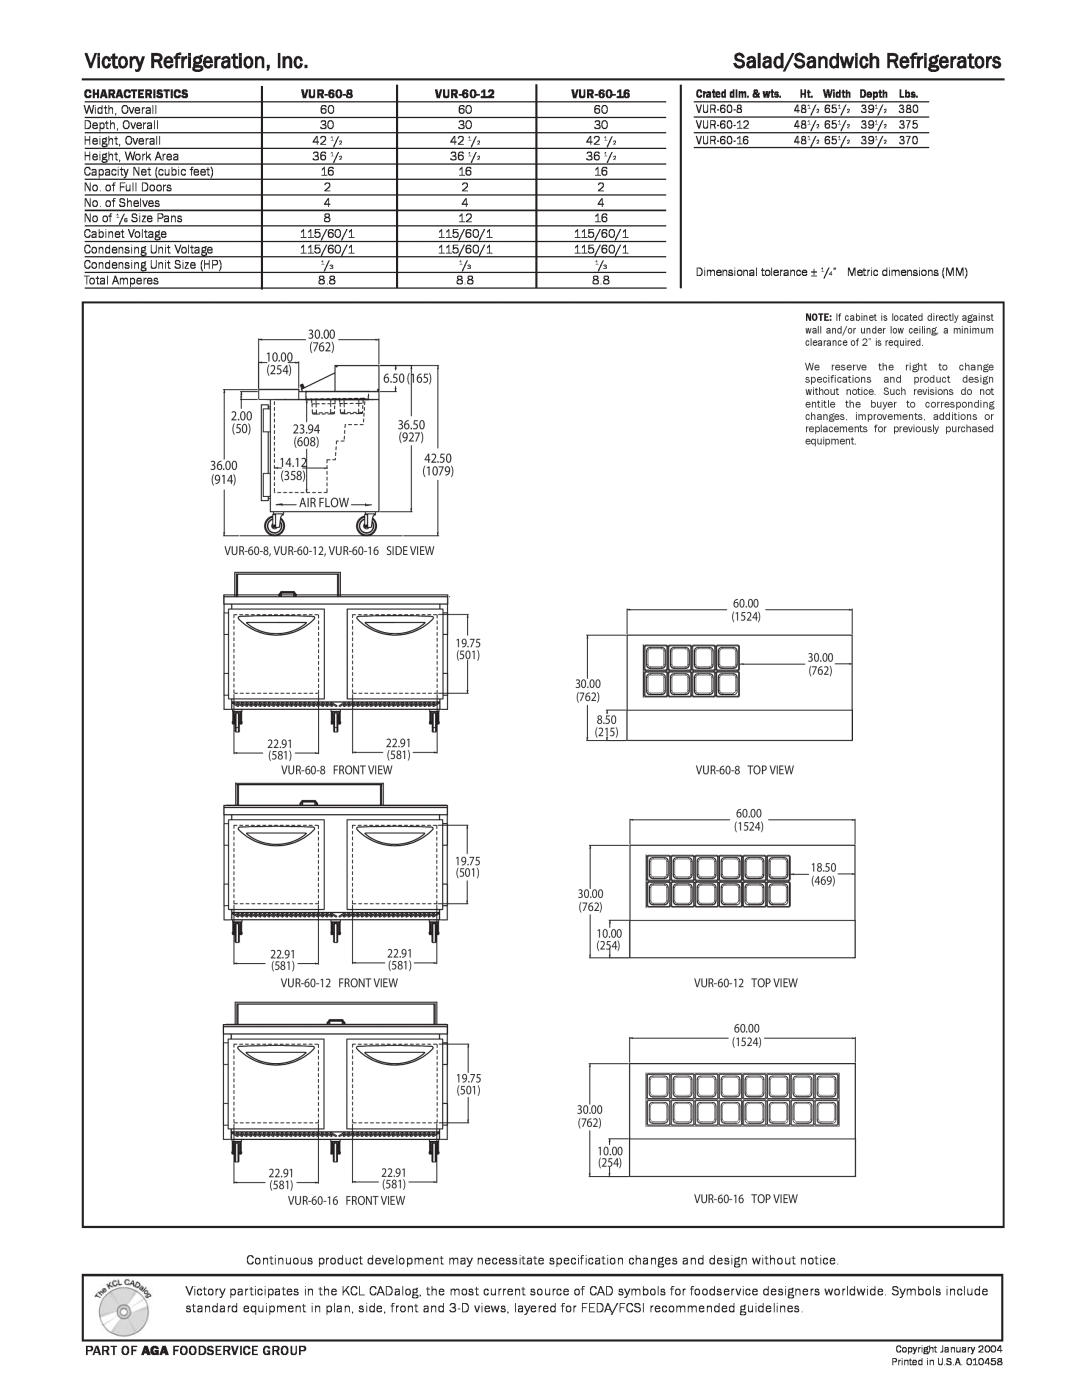 Victory Refrigeration VUR-60-8 specifications Victory Refrigeration, Inc, Salad/Sandwich Refrigerators 